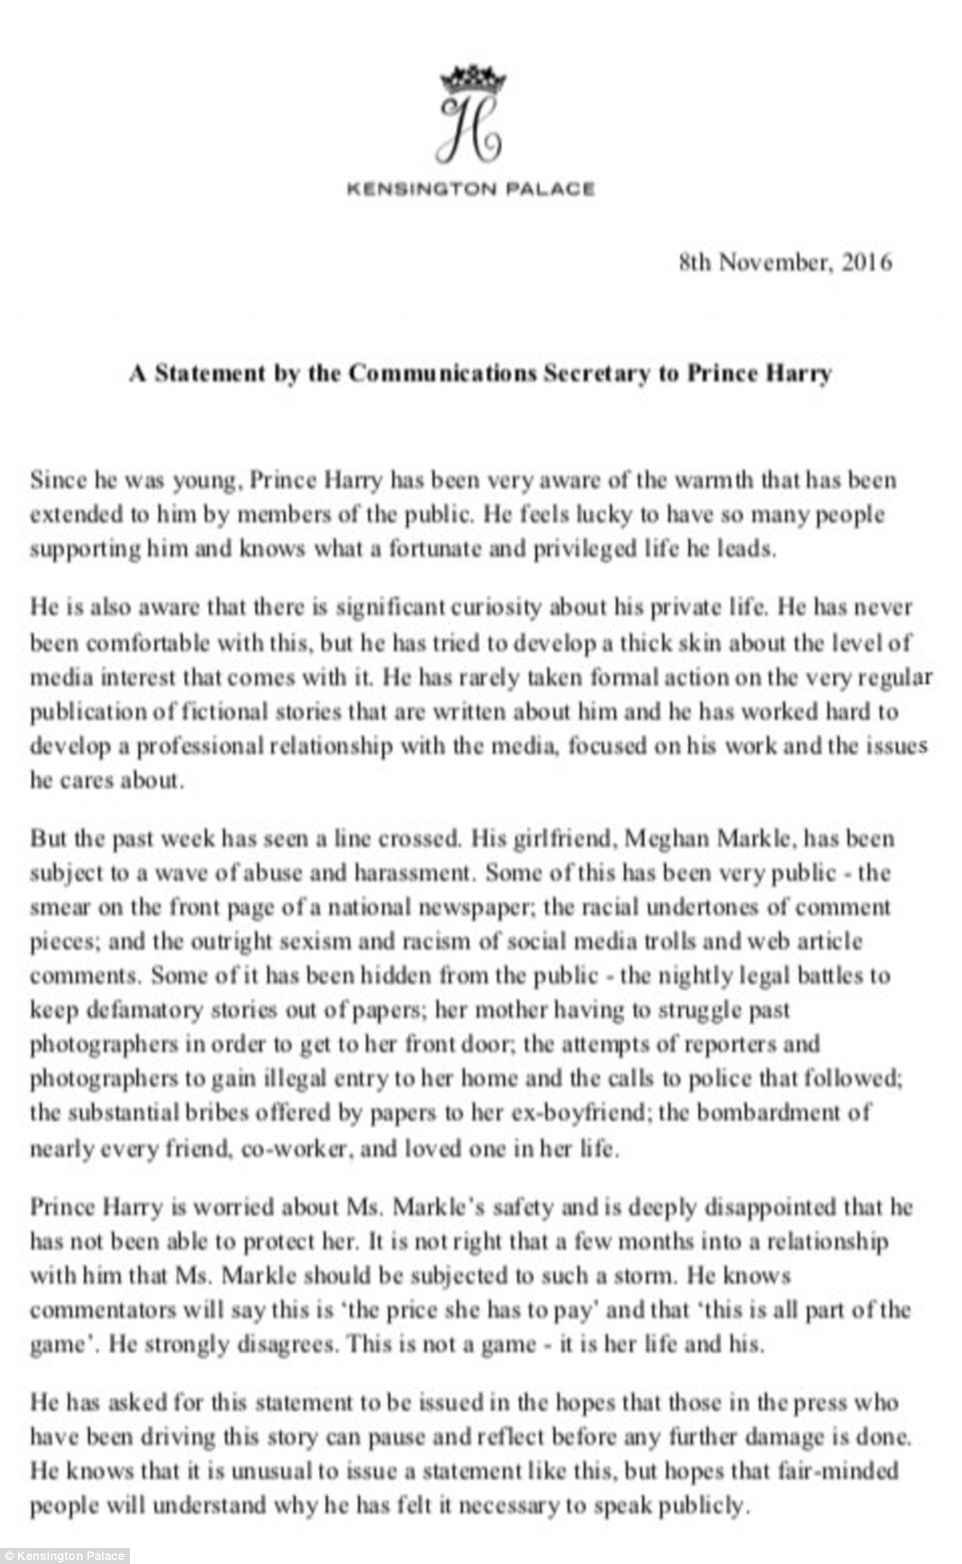 3a2bbc0200000578-3916188-in_a_lengthy_and_strongly_worded_statement_harry_s_communication-a-119_1478604572499